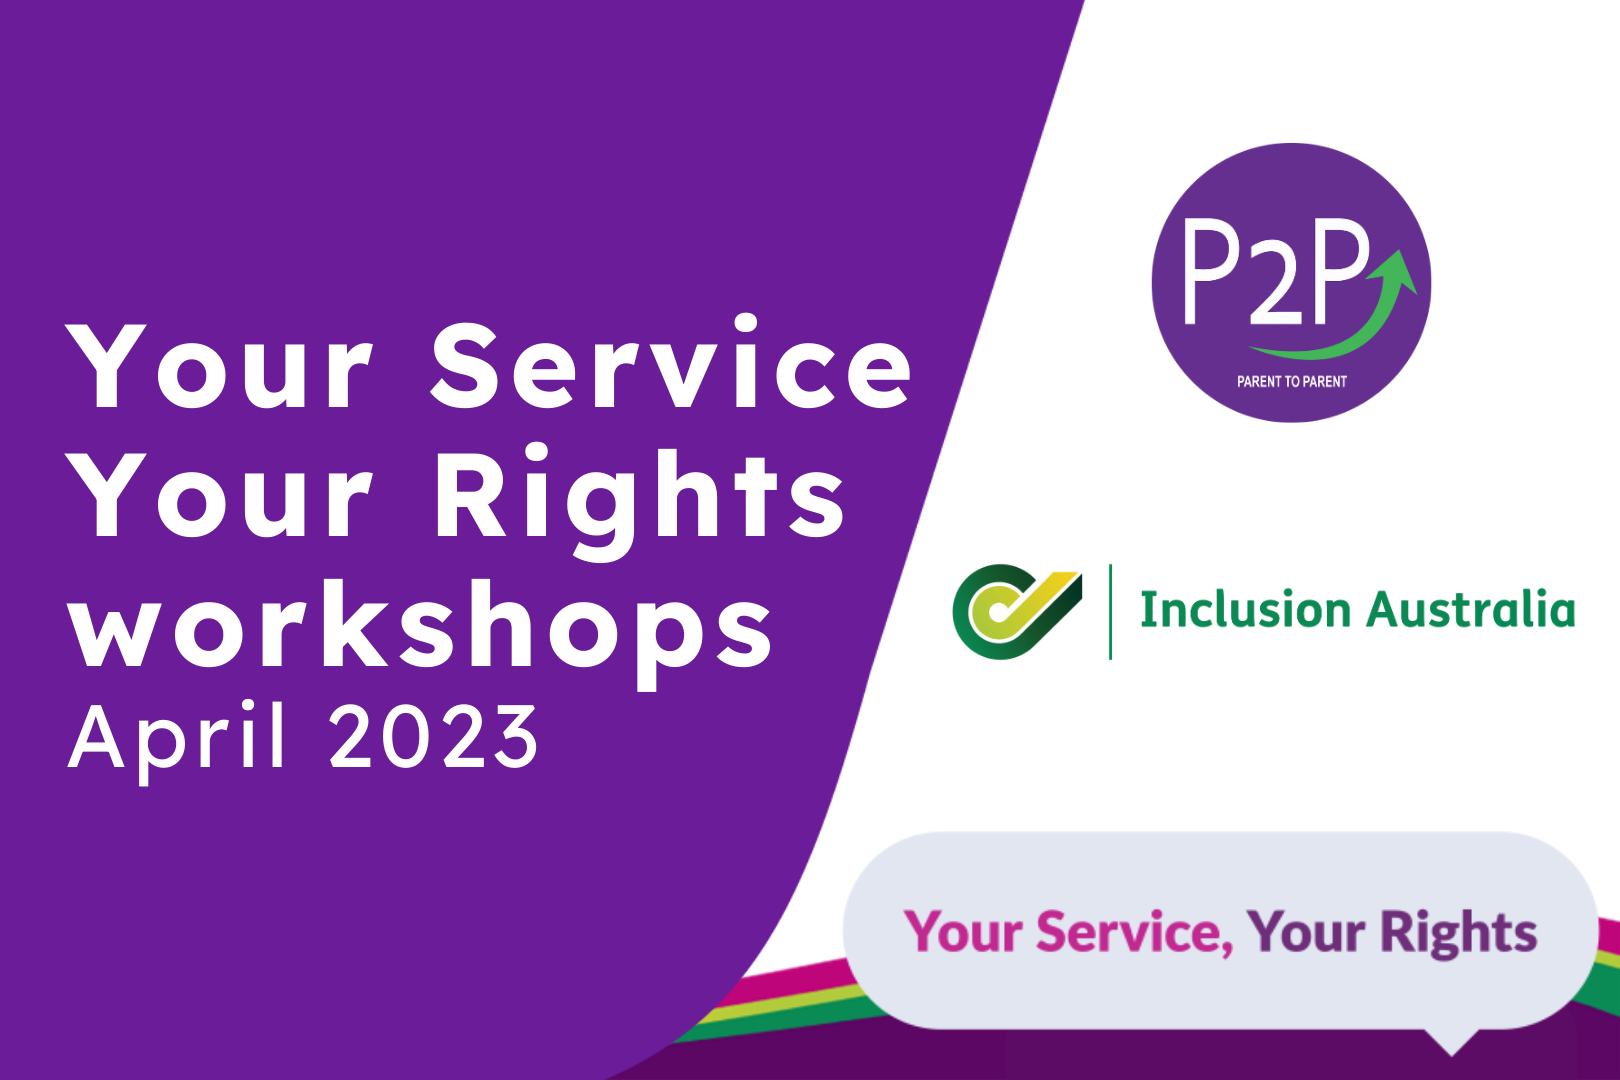 A purple backround with white writing reads your service your rights workshops april 2023. Parent 2 Parent and Inclusion Australia logos sit on a purple background on the left.